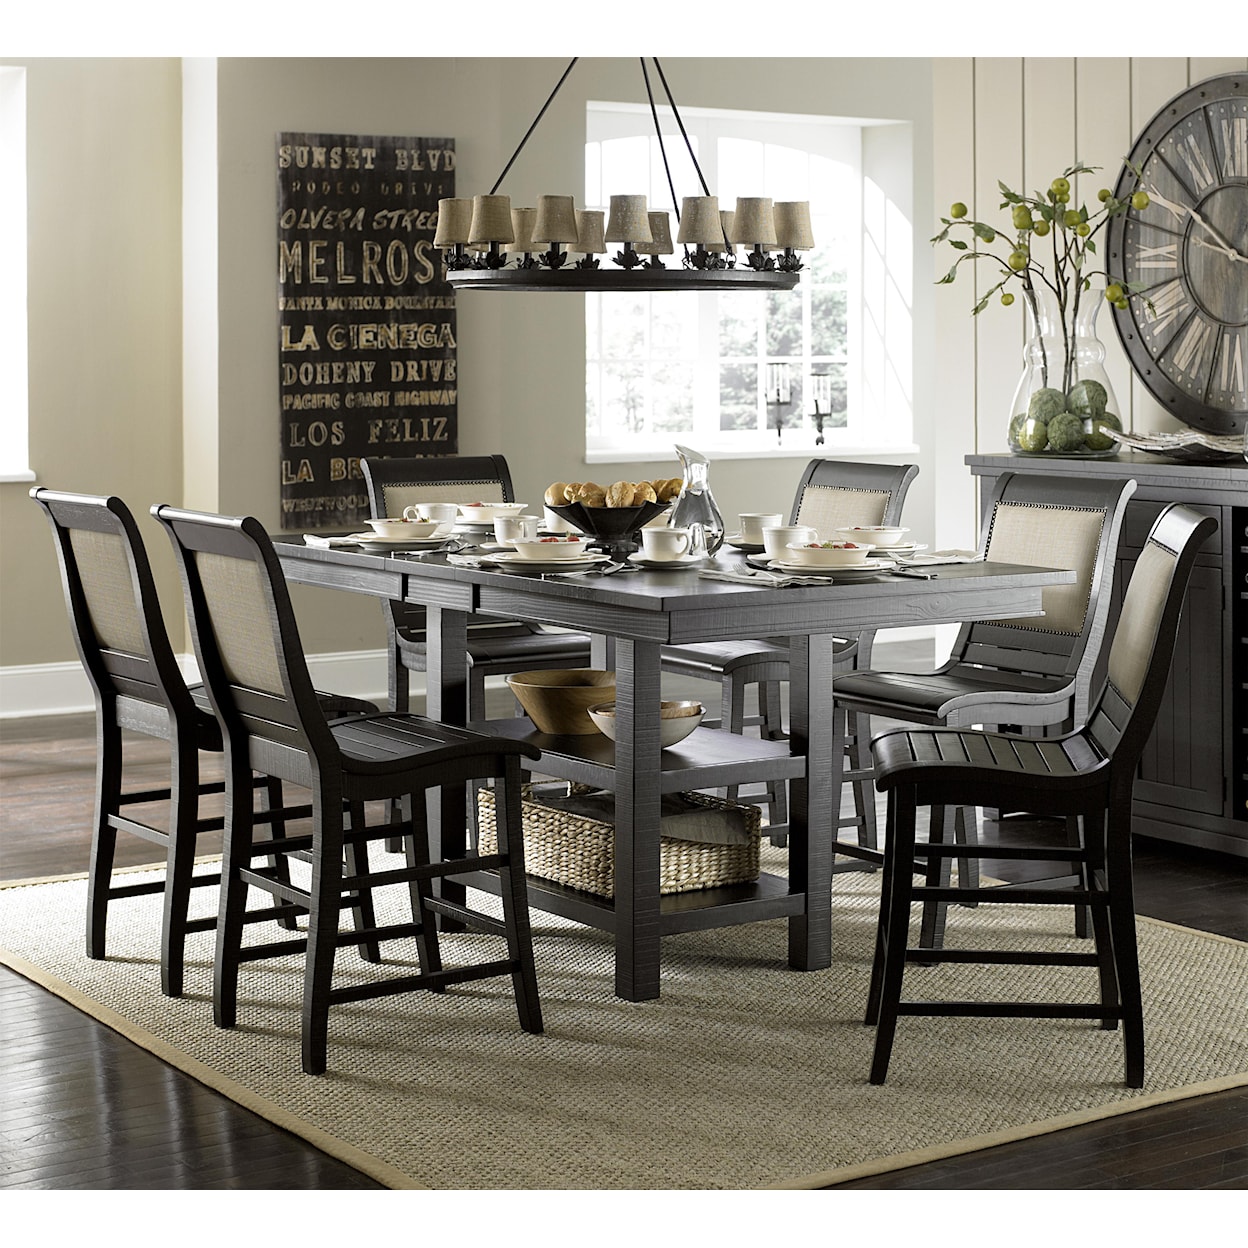 Carolina Chairs Willow Dining 7-Piece Rect. Counter Height Table Set